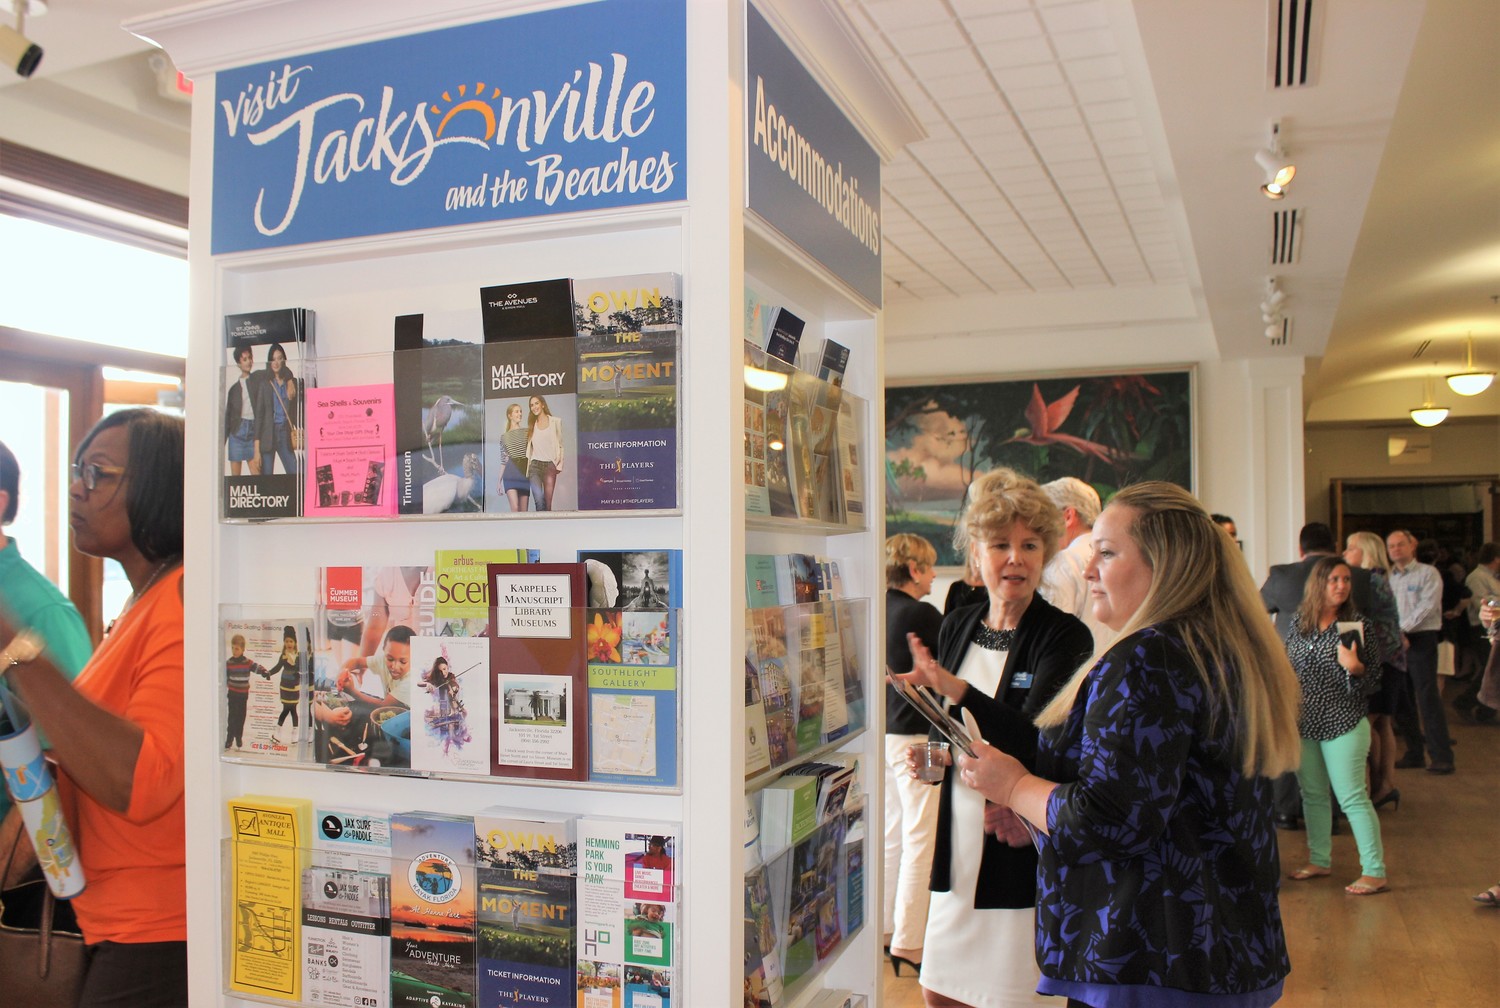 Visitors at the Beaches Museum & History Park explore Visit Jacksonville’s new Beaches Visitor Center.